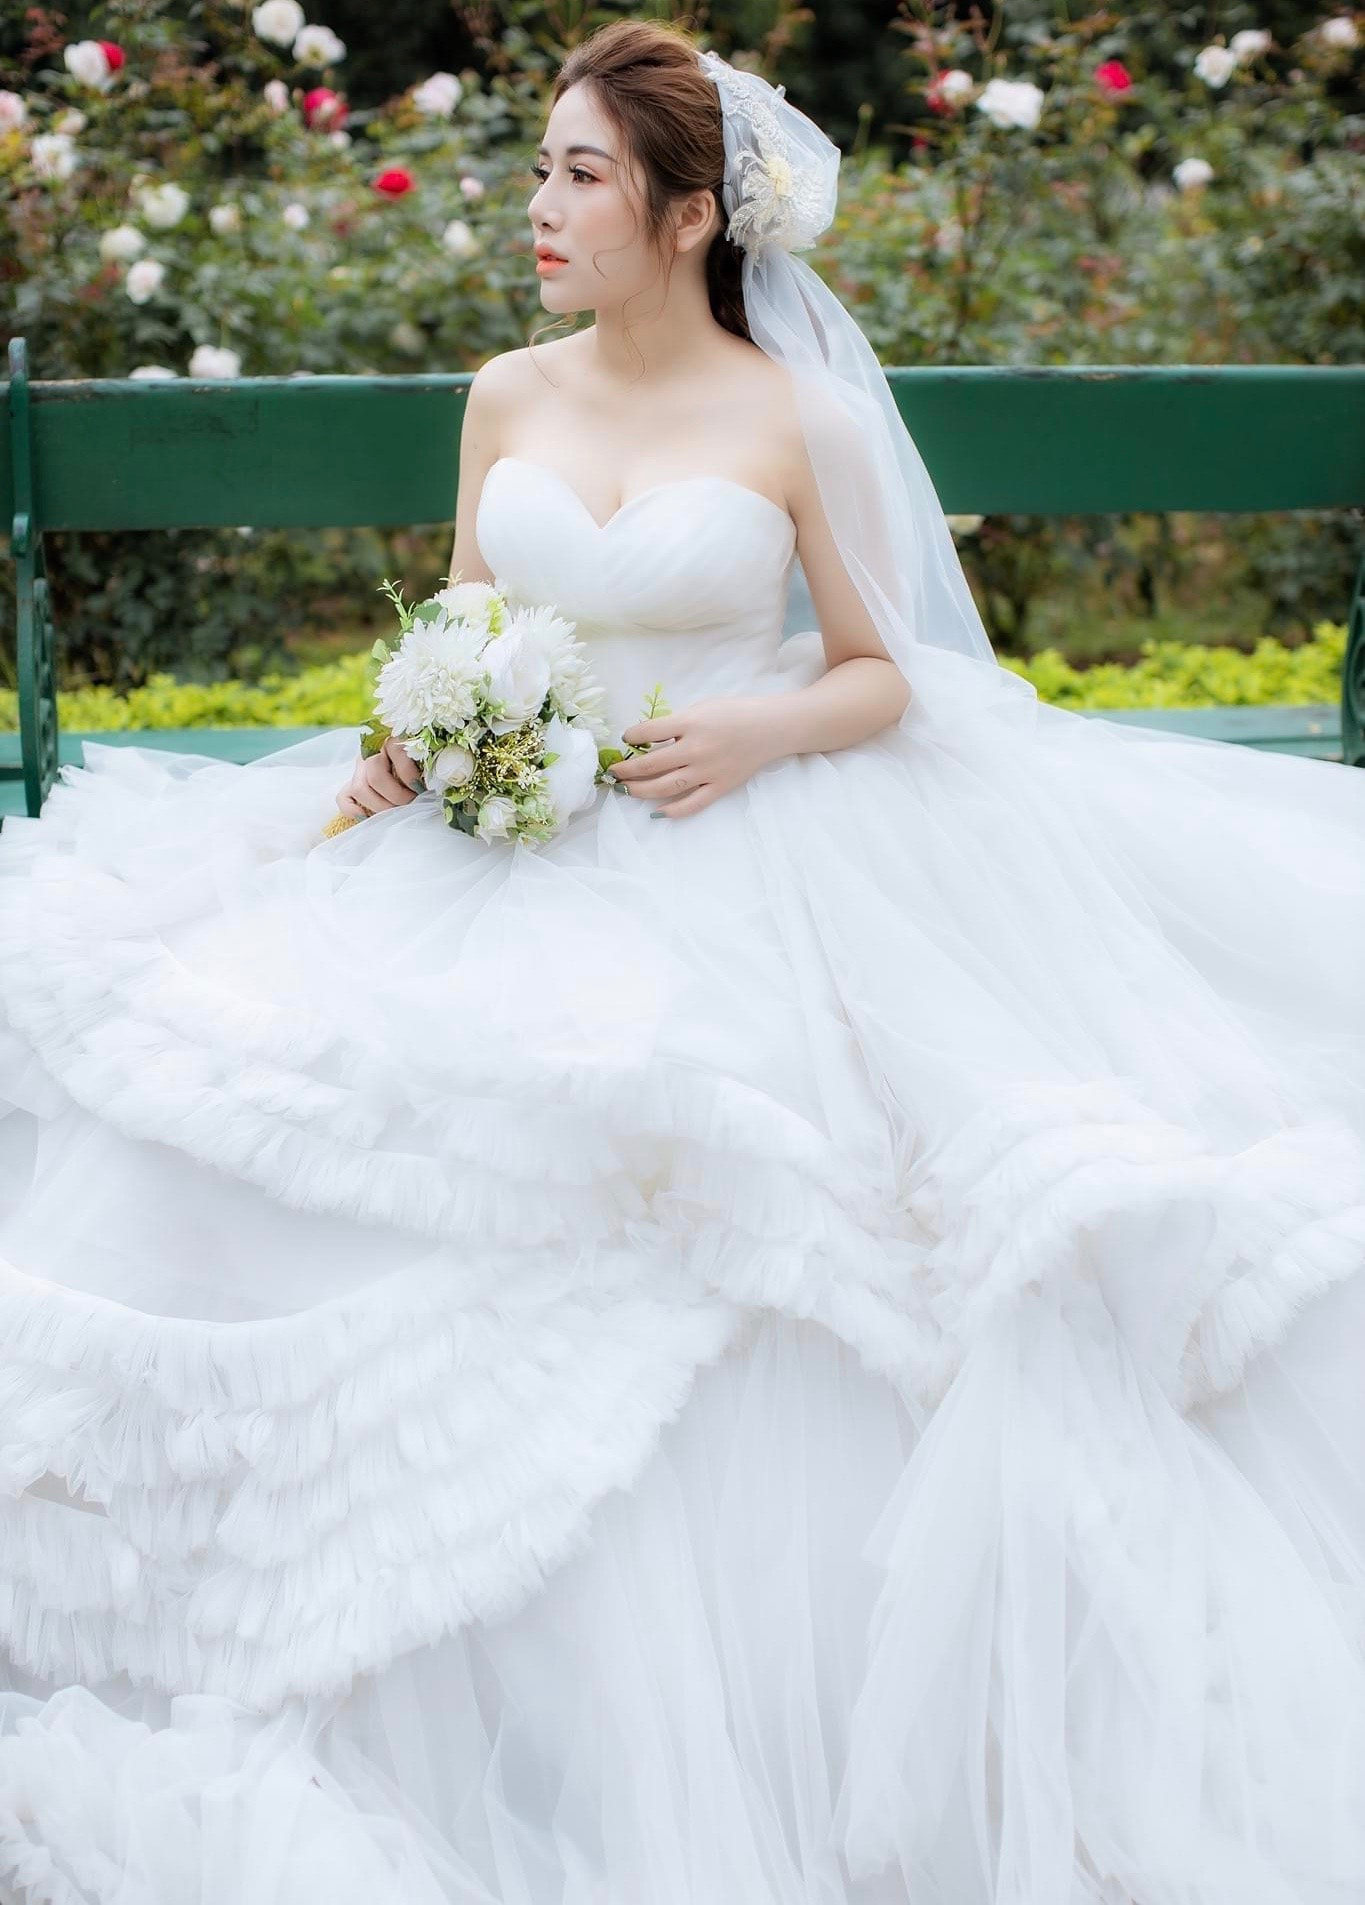 My sister who bought half of the wedding dress rental business decided to  sponsor my wedding dress and I am very grateful (I removed mask because it  was only me and my